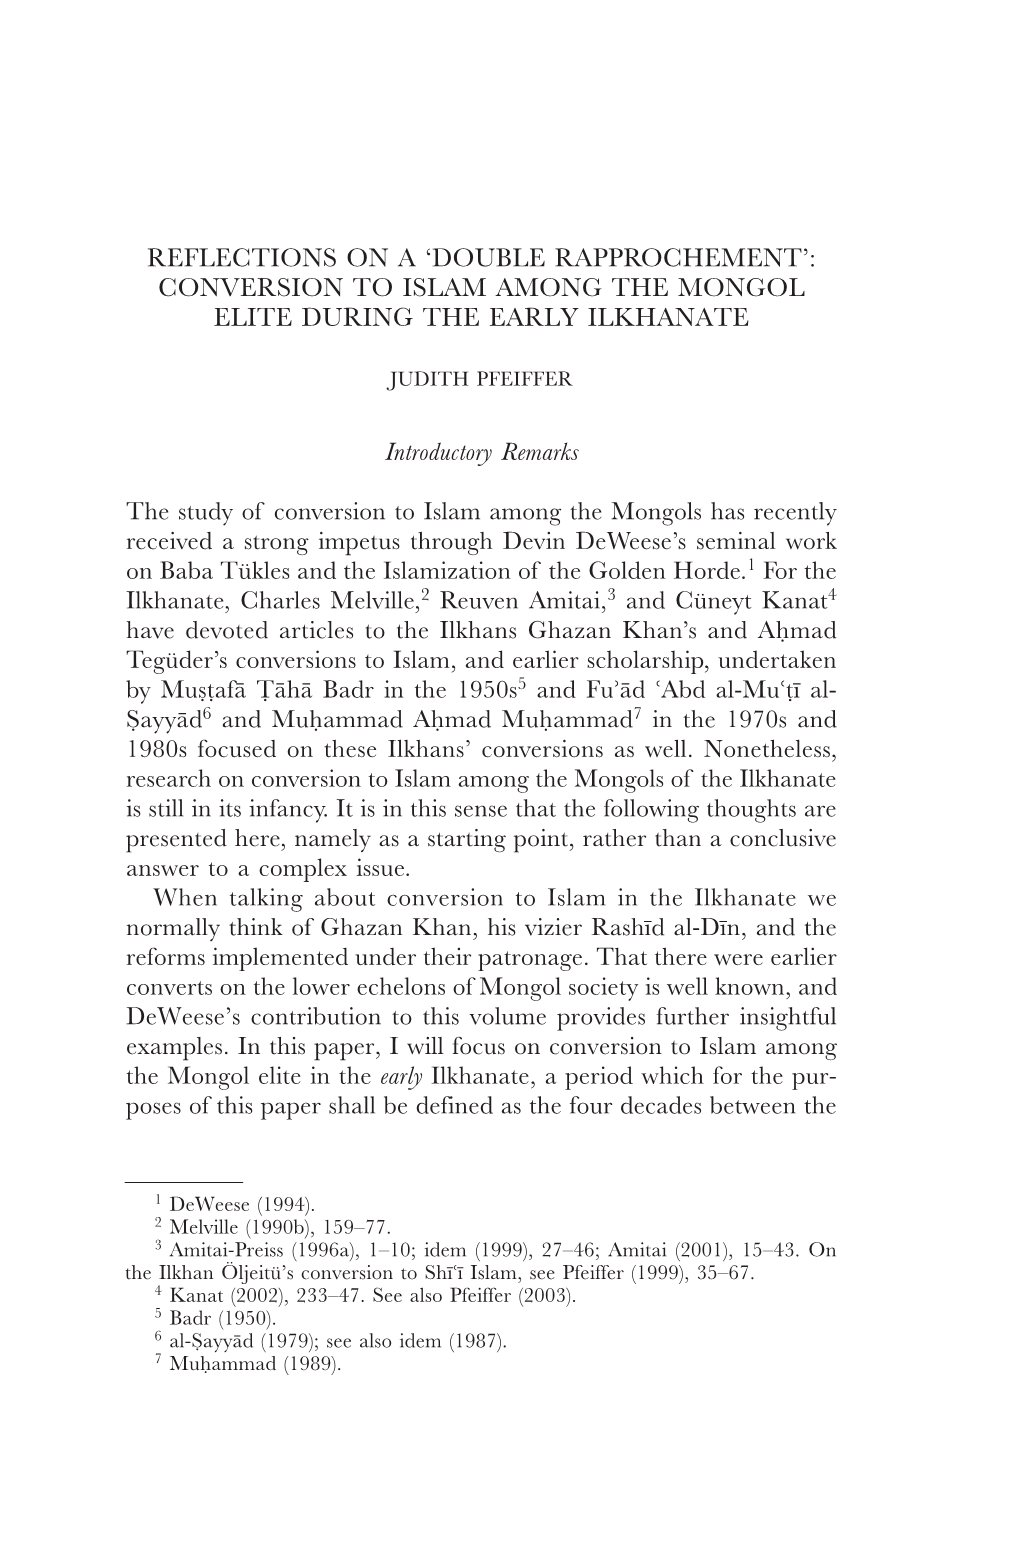 'Double Rapprochement': Conversion to Islam Among the Mongol Elite During the Early Ilkhanate